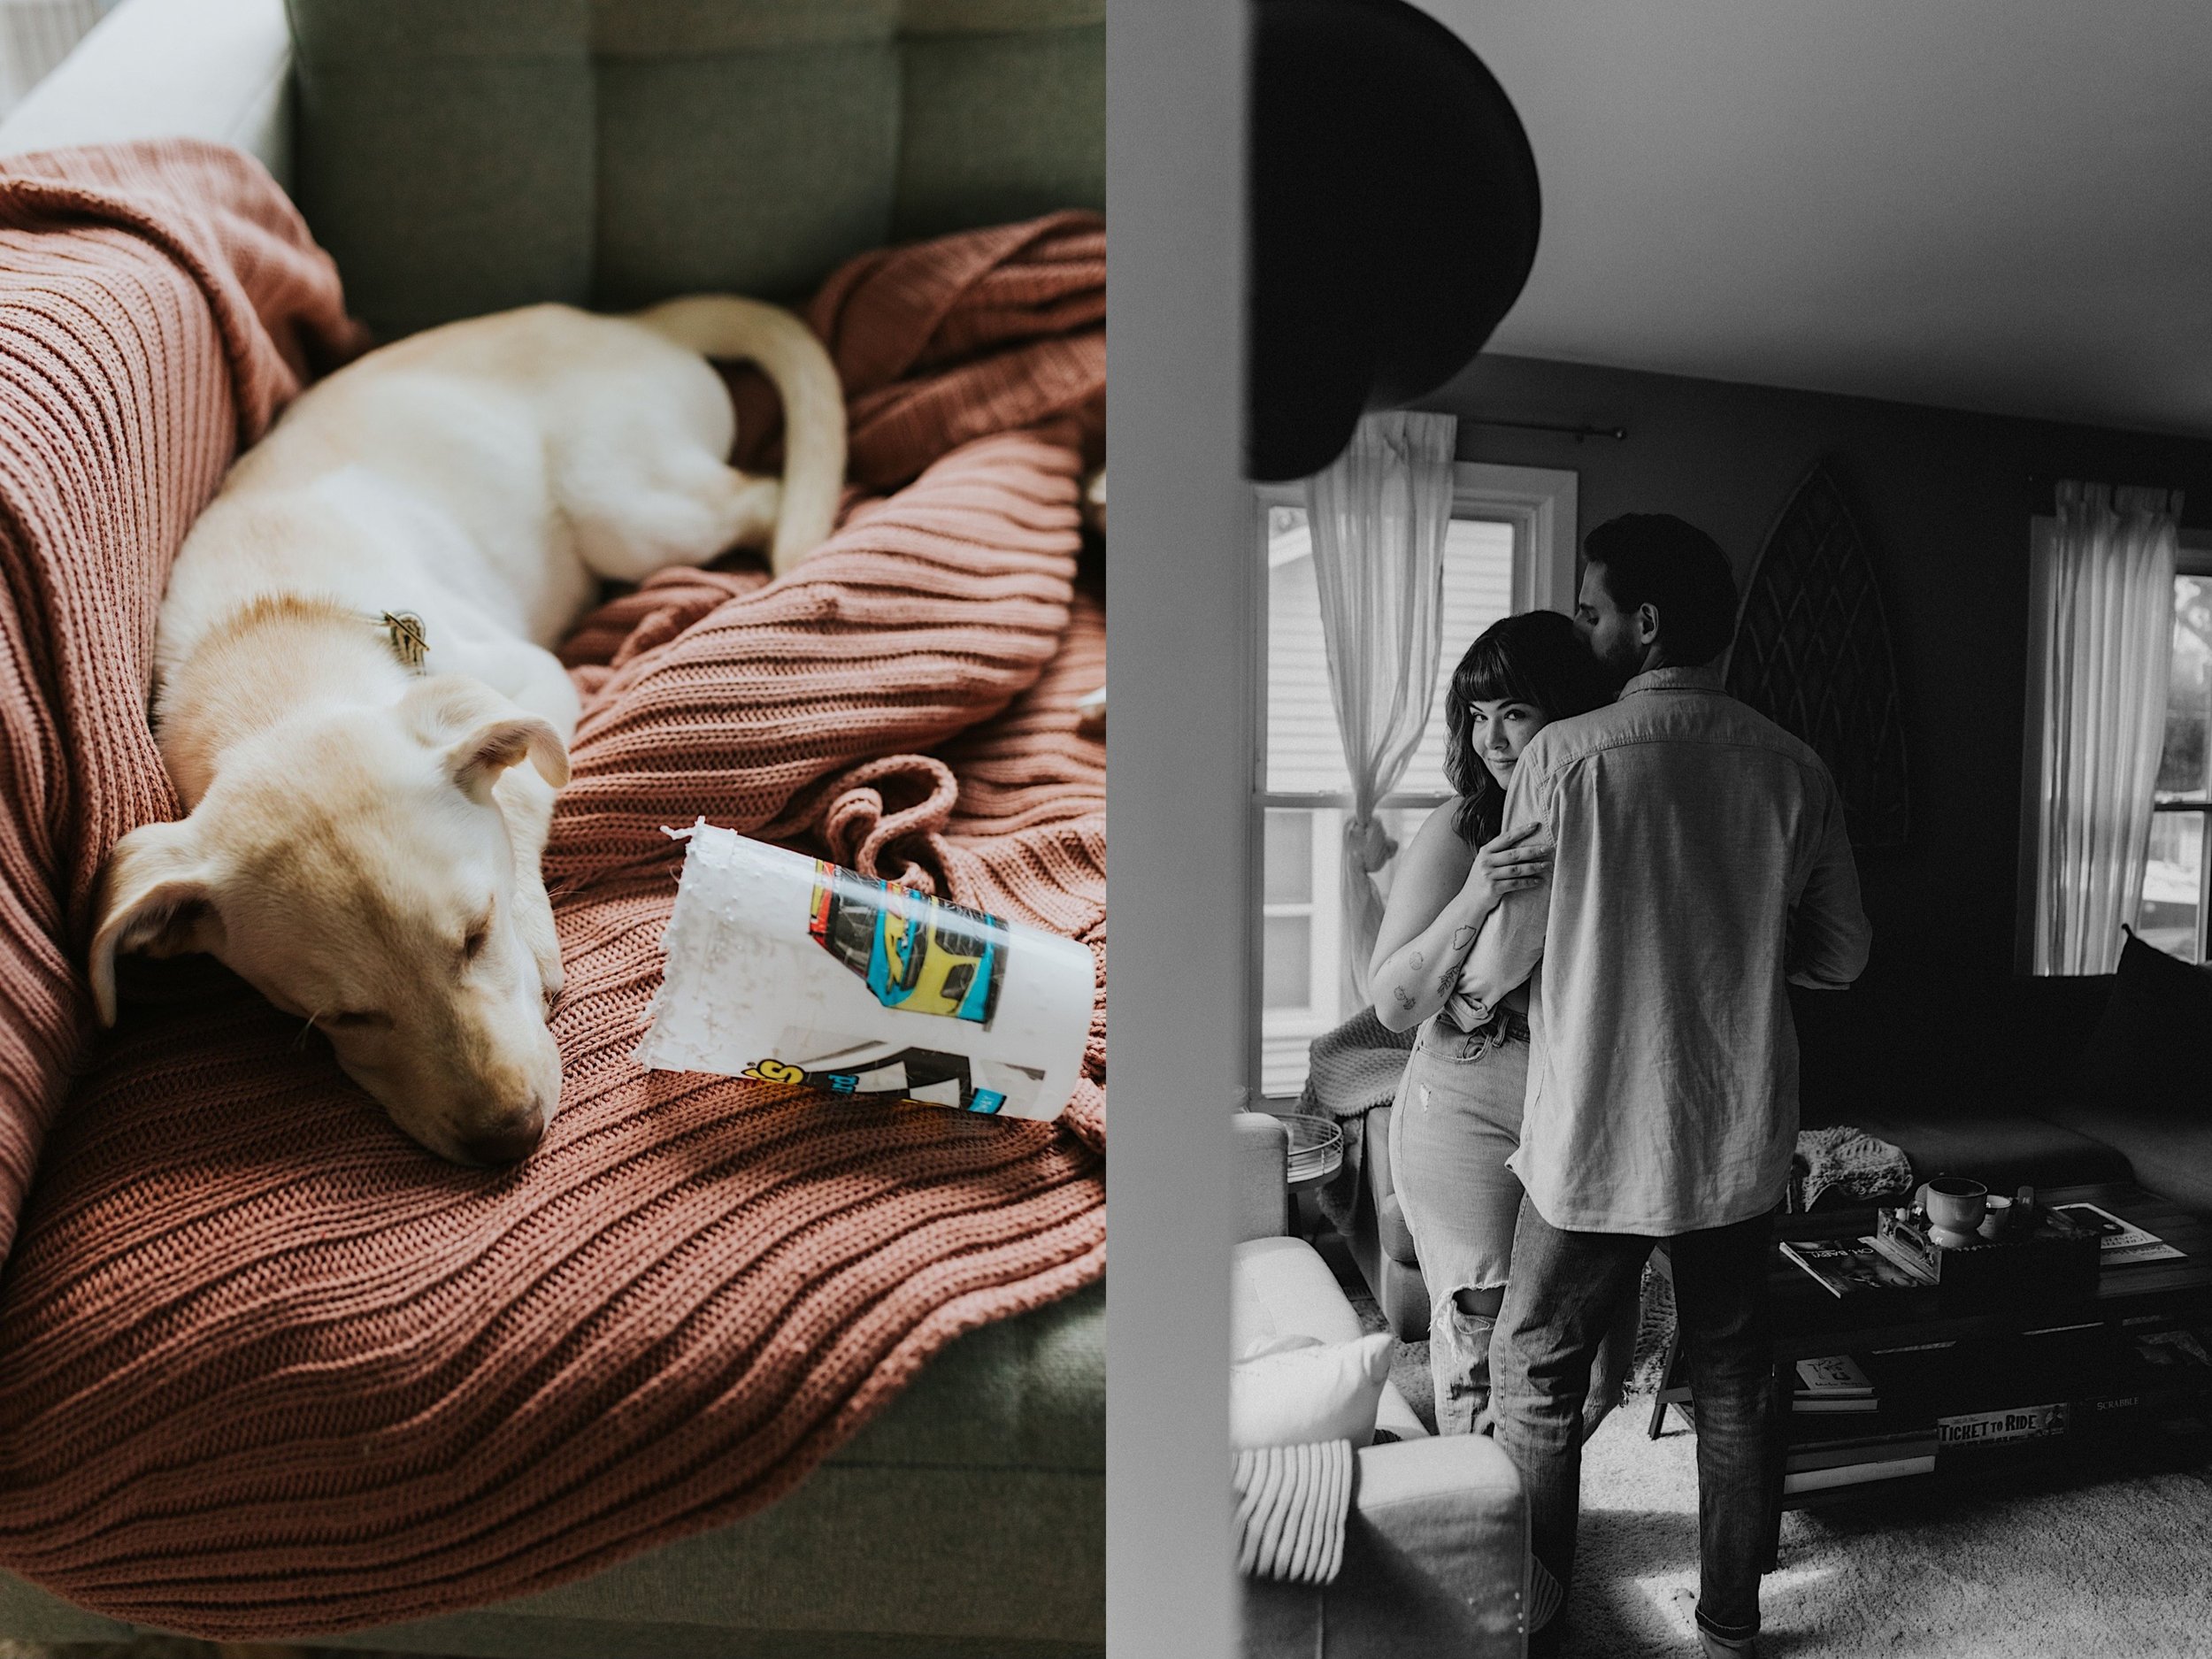 Left side image, a dog lays on a pink knit blanket while napping next to its' toy.  Right side image a couple embraces while standing in front of a window.  The wife looks directly at the camera, the image is in black and white.